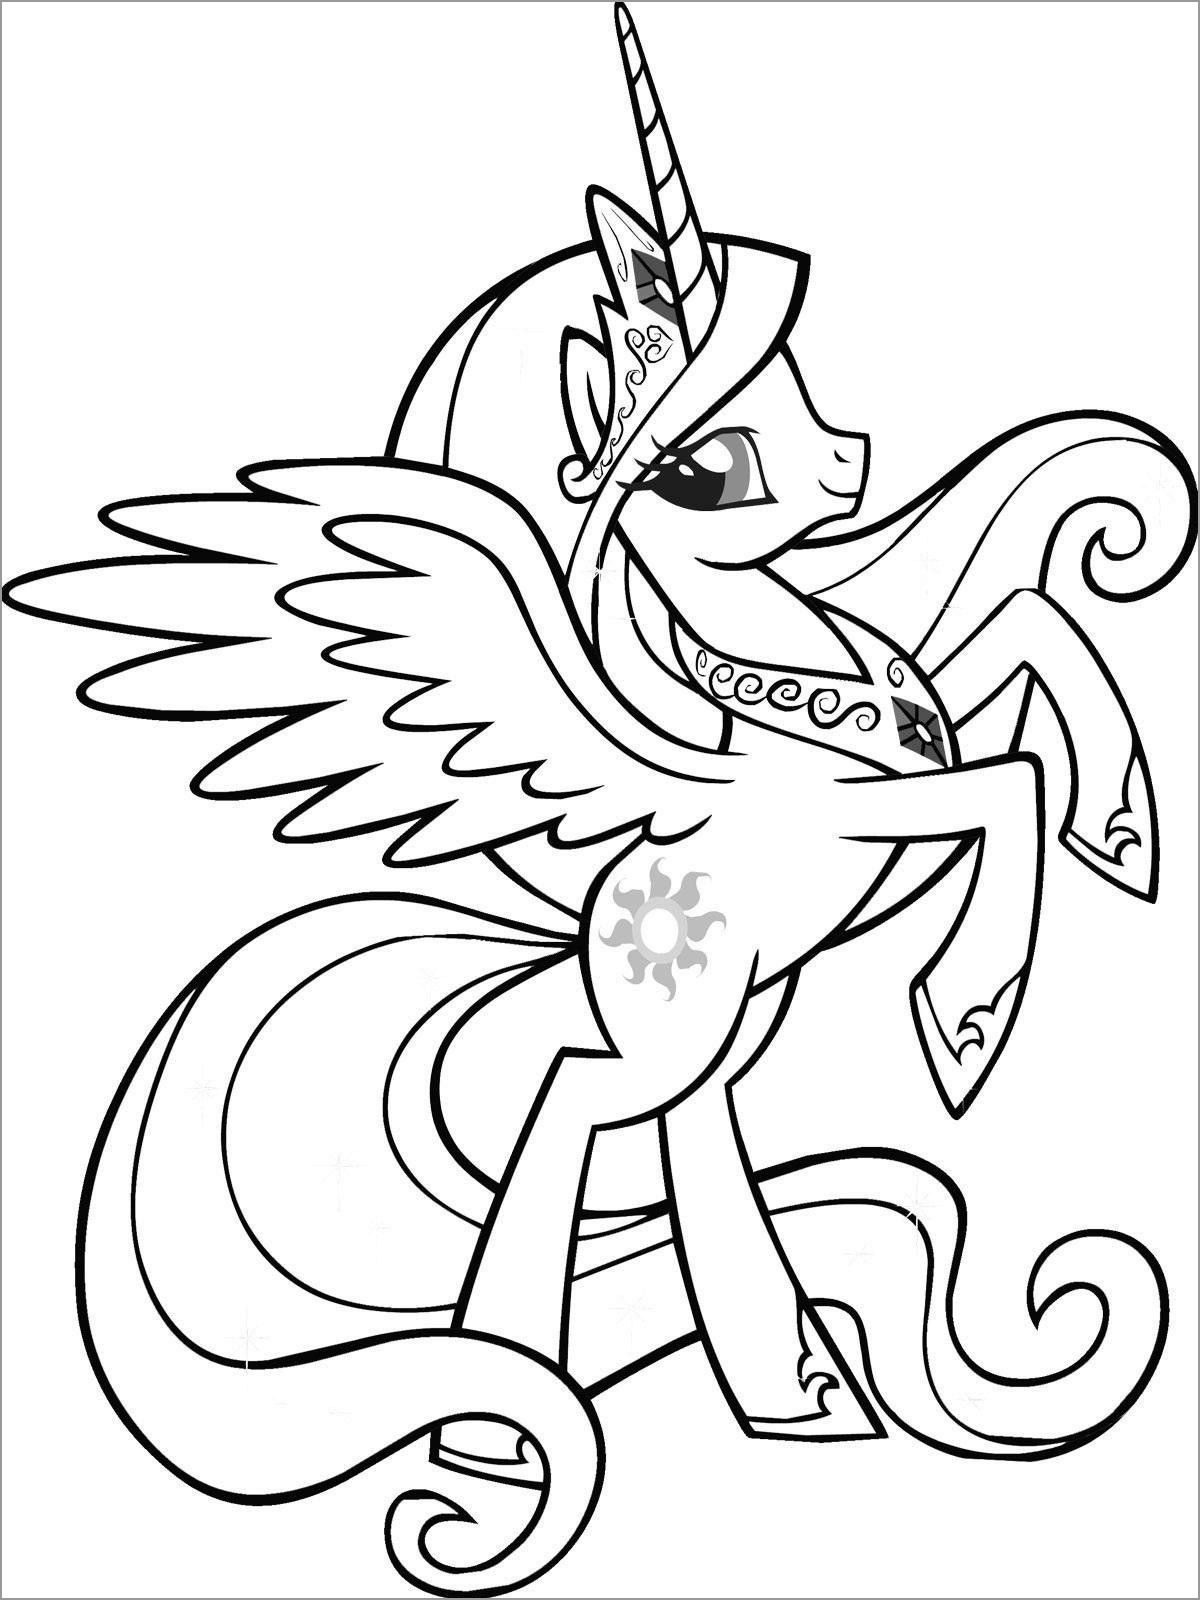 Unicorn 15 Coloring Pages